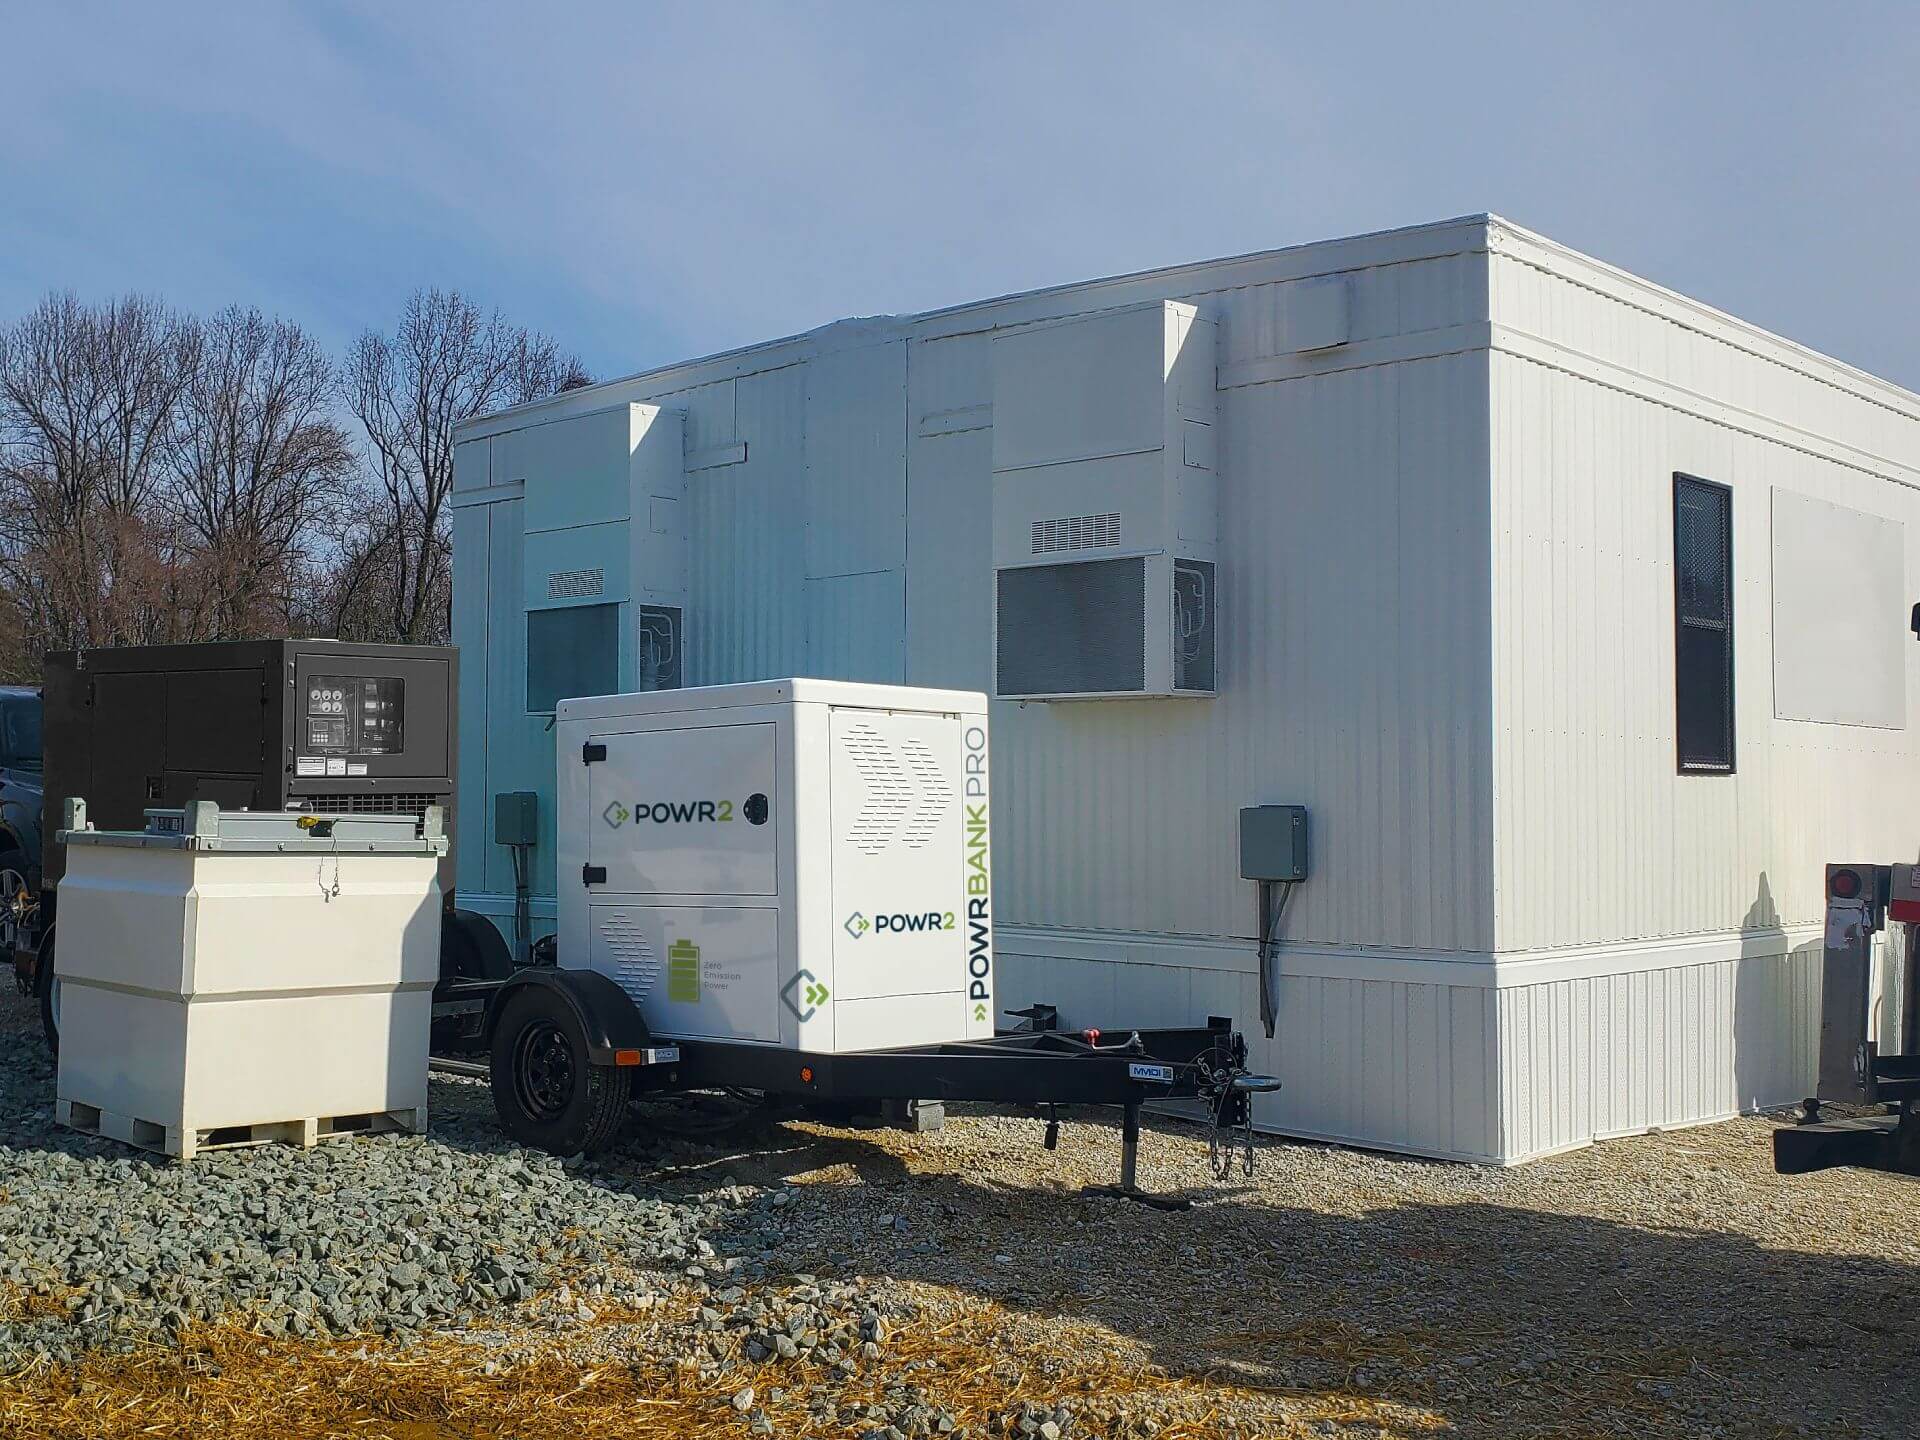 Silent POWRBANK Energy Storage System With Office Trailers